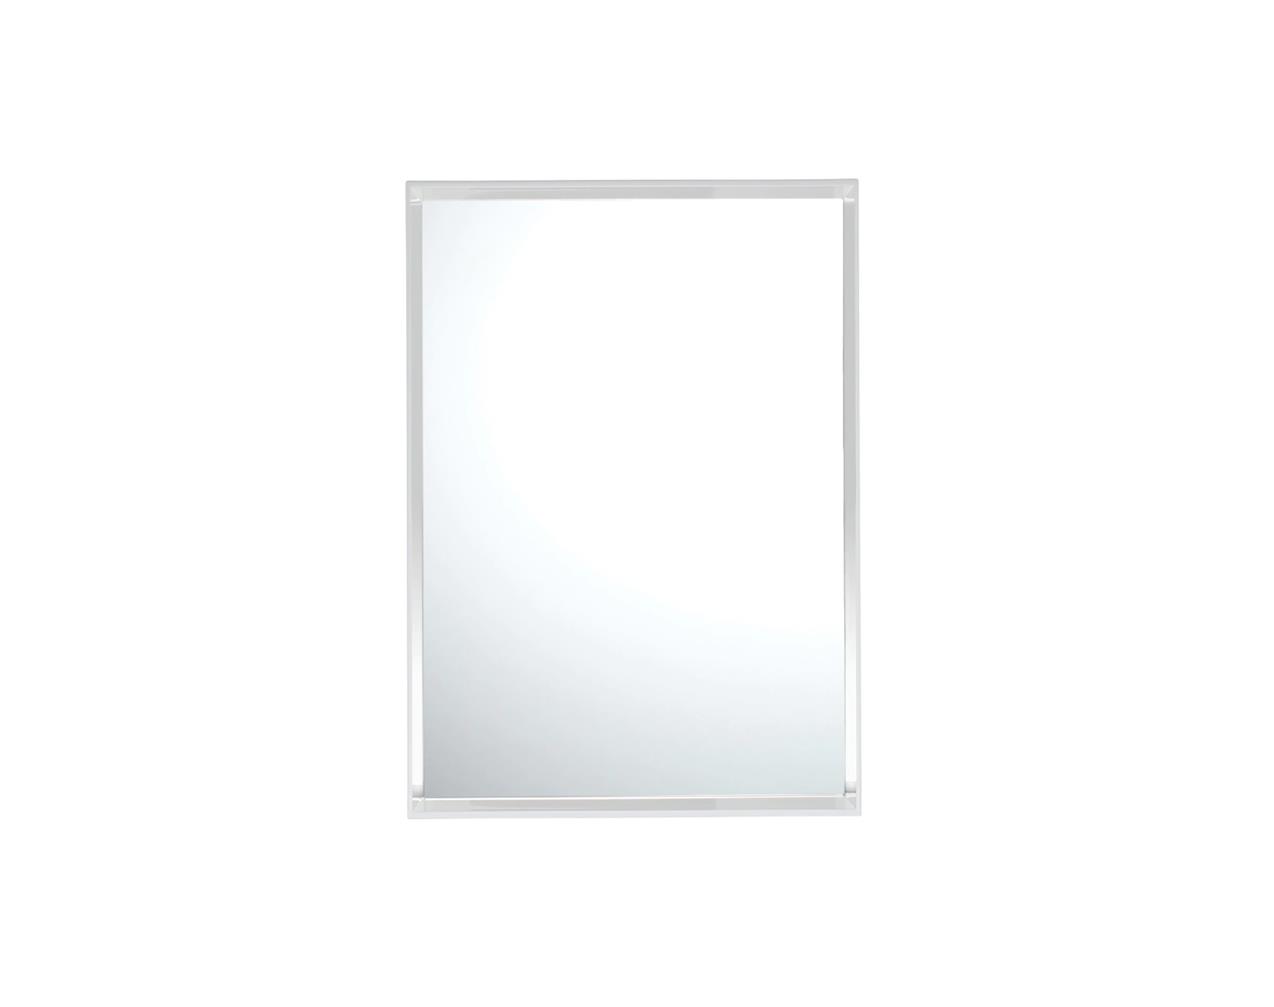 Only-Me-50x70-Glossy-White